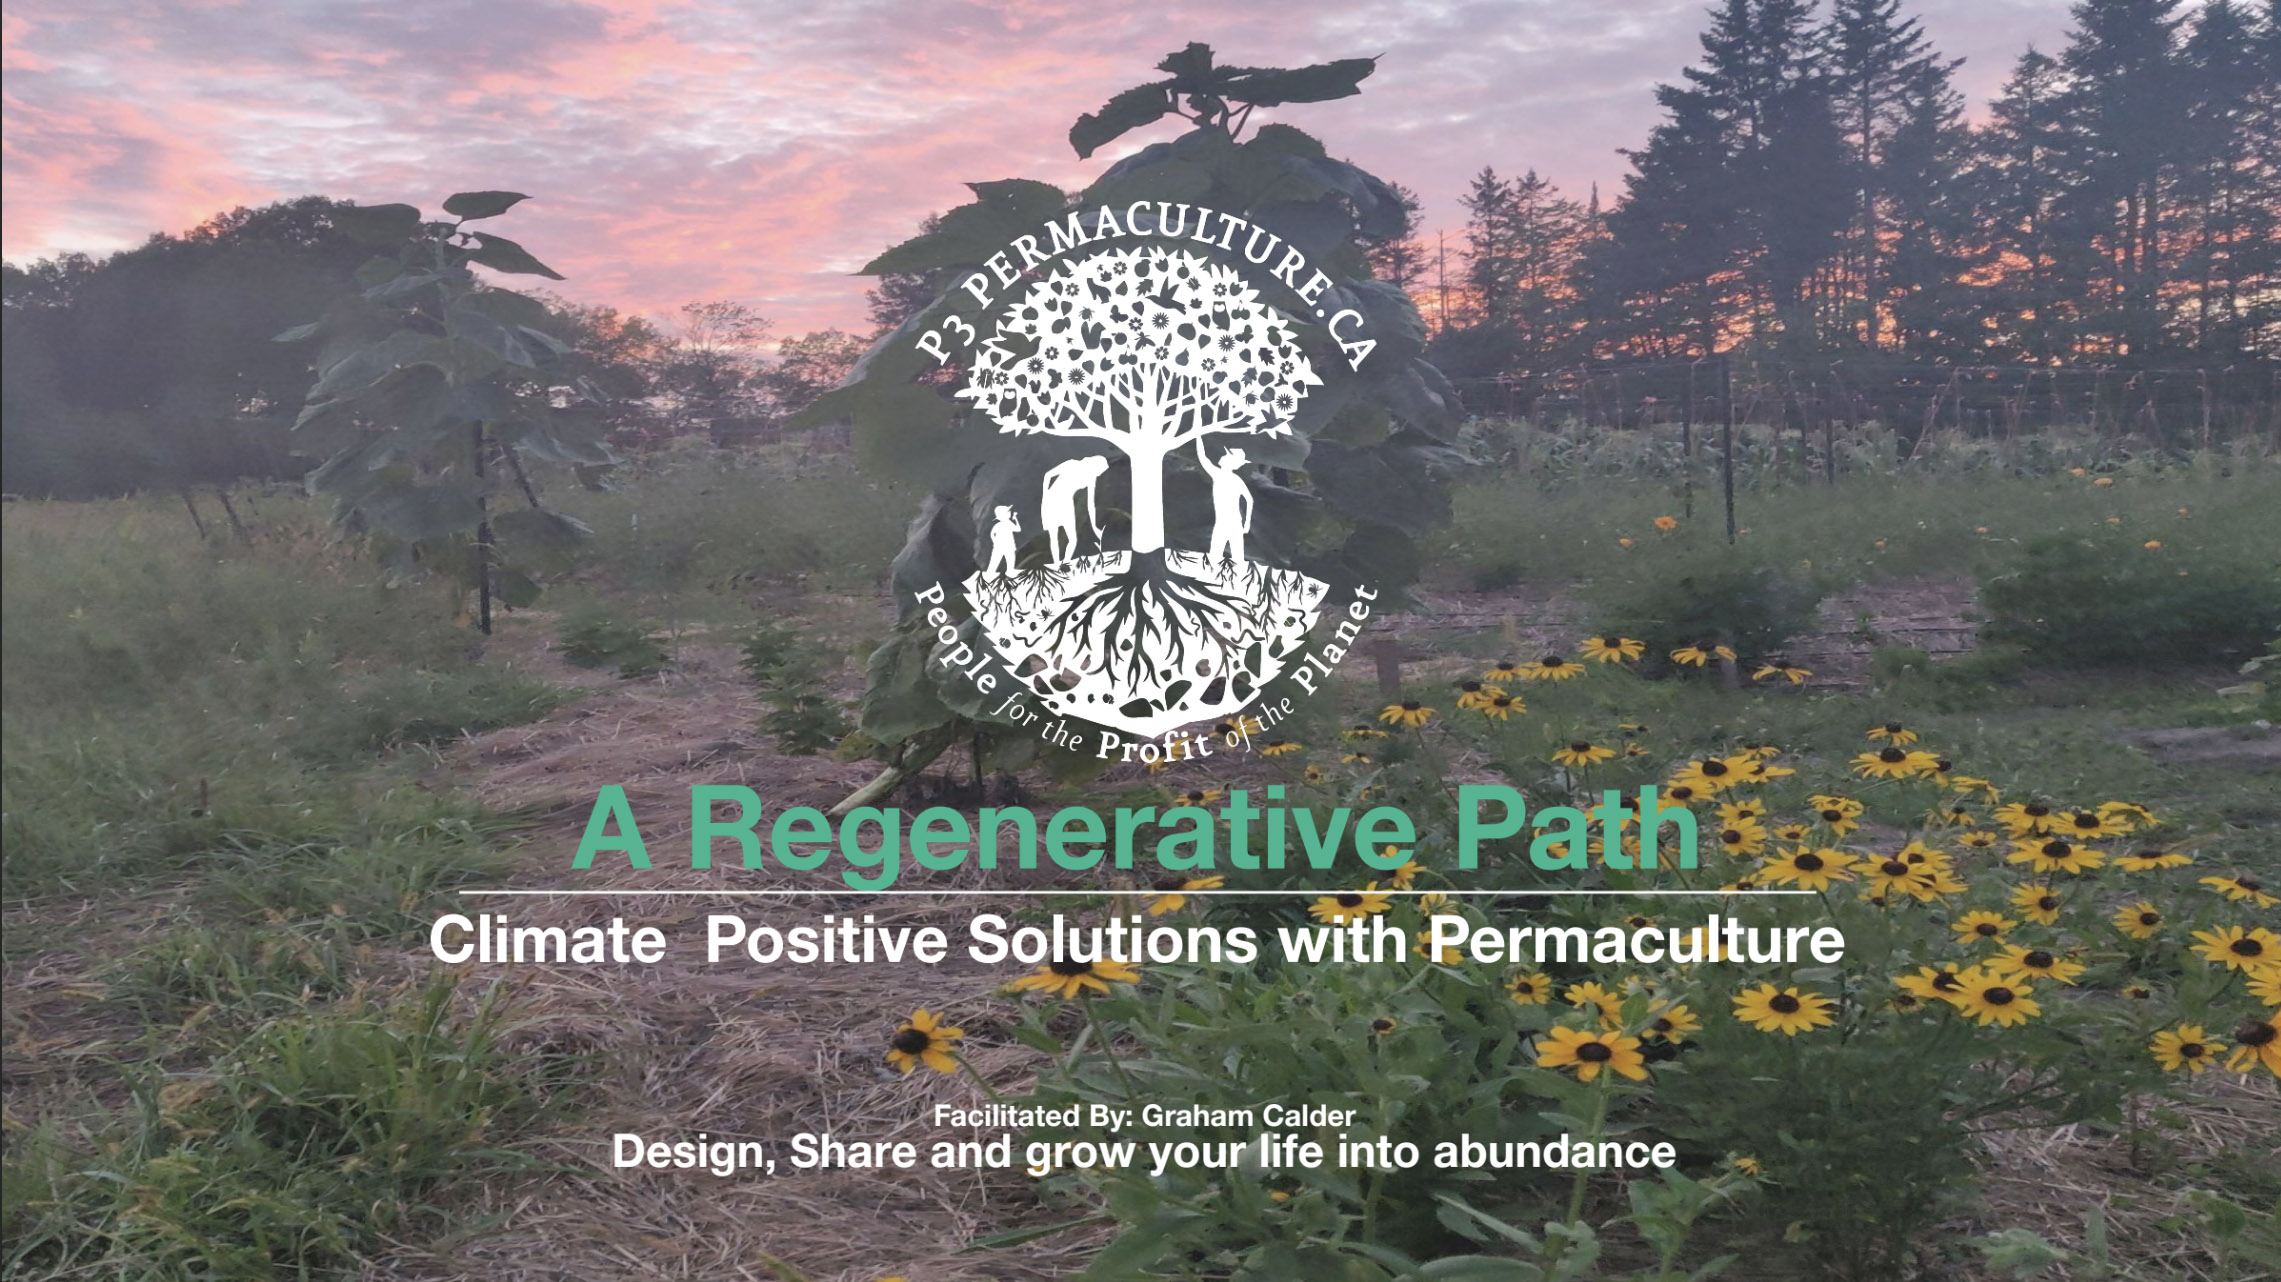 P3 Permaculture.ca - A Regenerative Path - Climate Positive Solutions with Permaculture - Facilitiated by: Graham Calder - Design, Share and grow your life into abundance